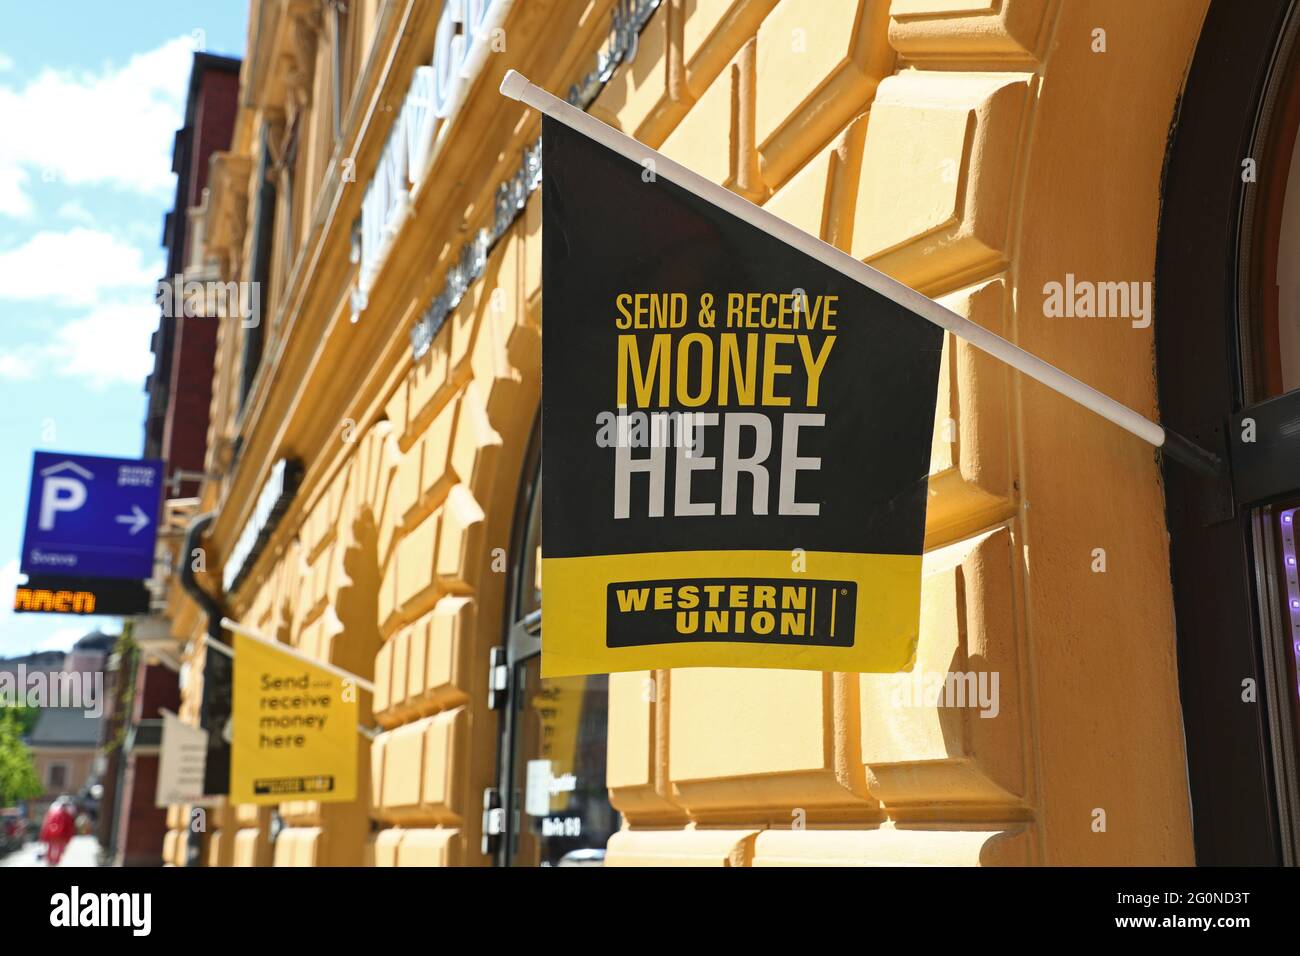 The Western Union Company in the city of Uppsala, Sweden Stock Photo - Alamy